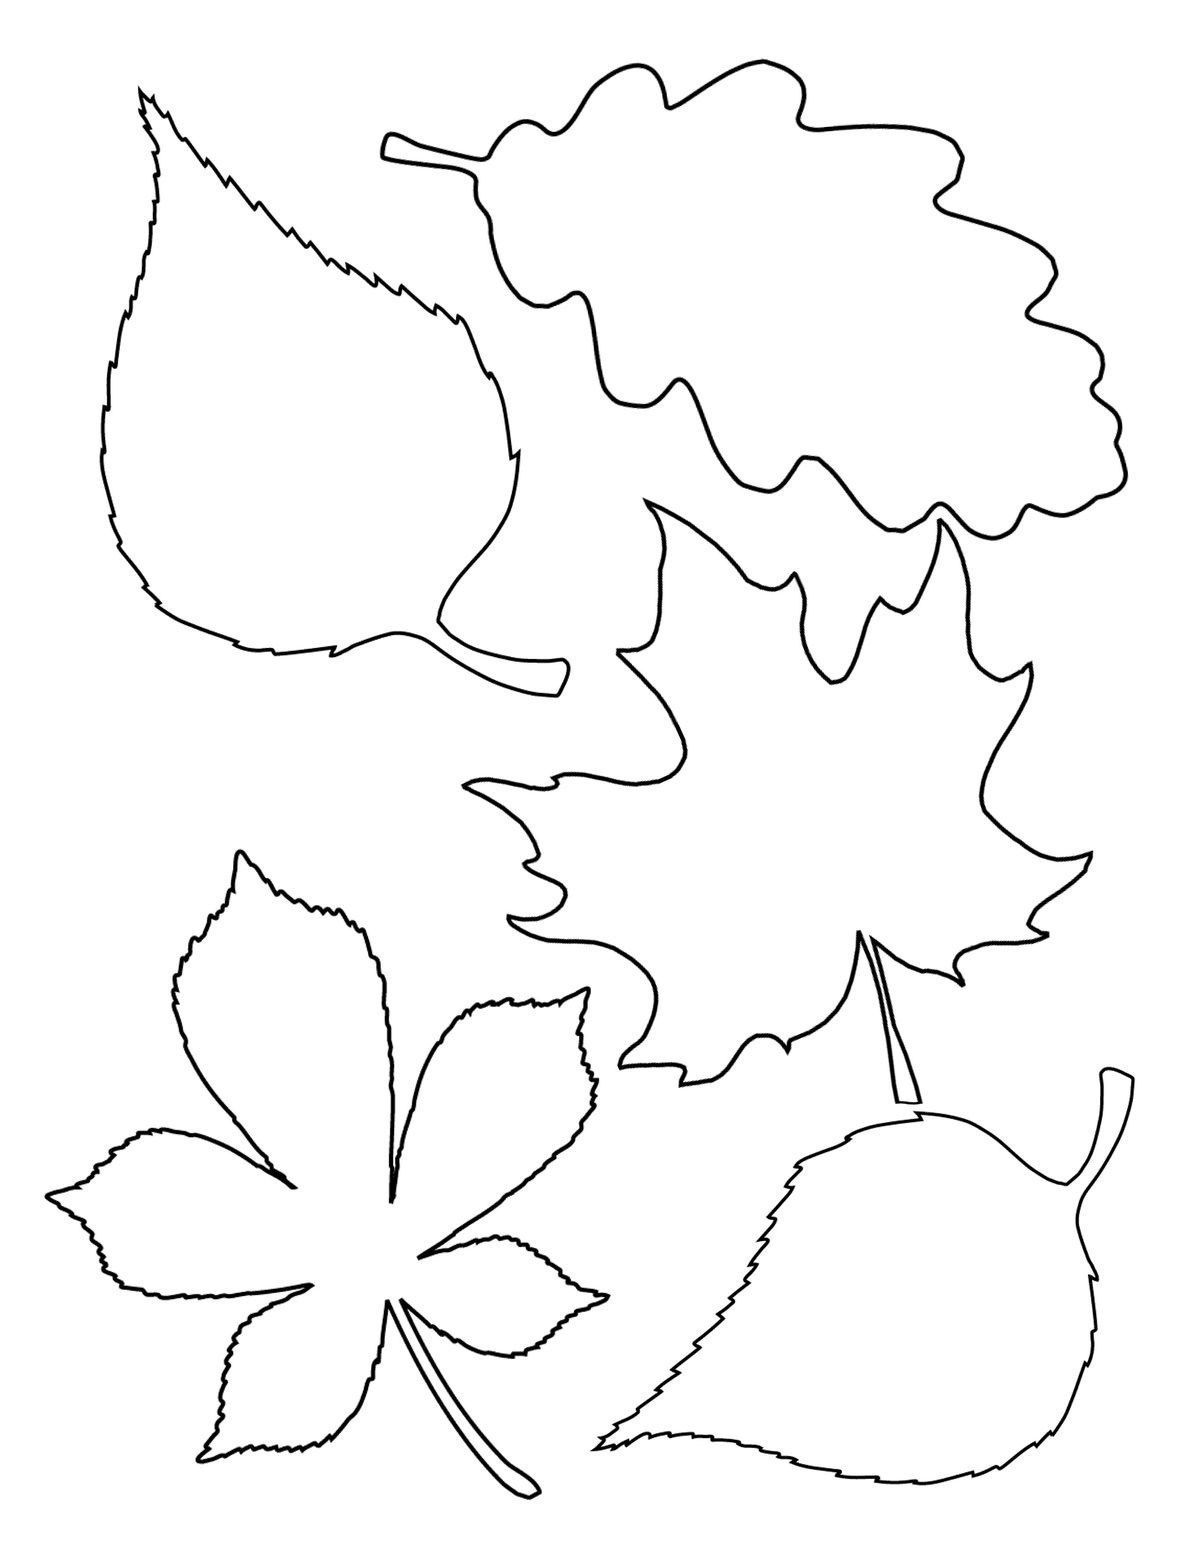 Coloring Pages | Autumn Leaves Coloring Pages Fantastic Photo Ideas